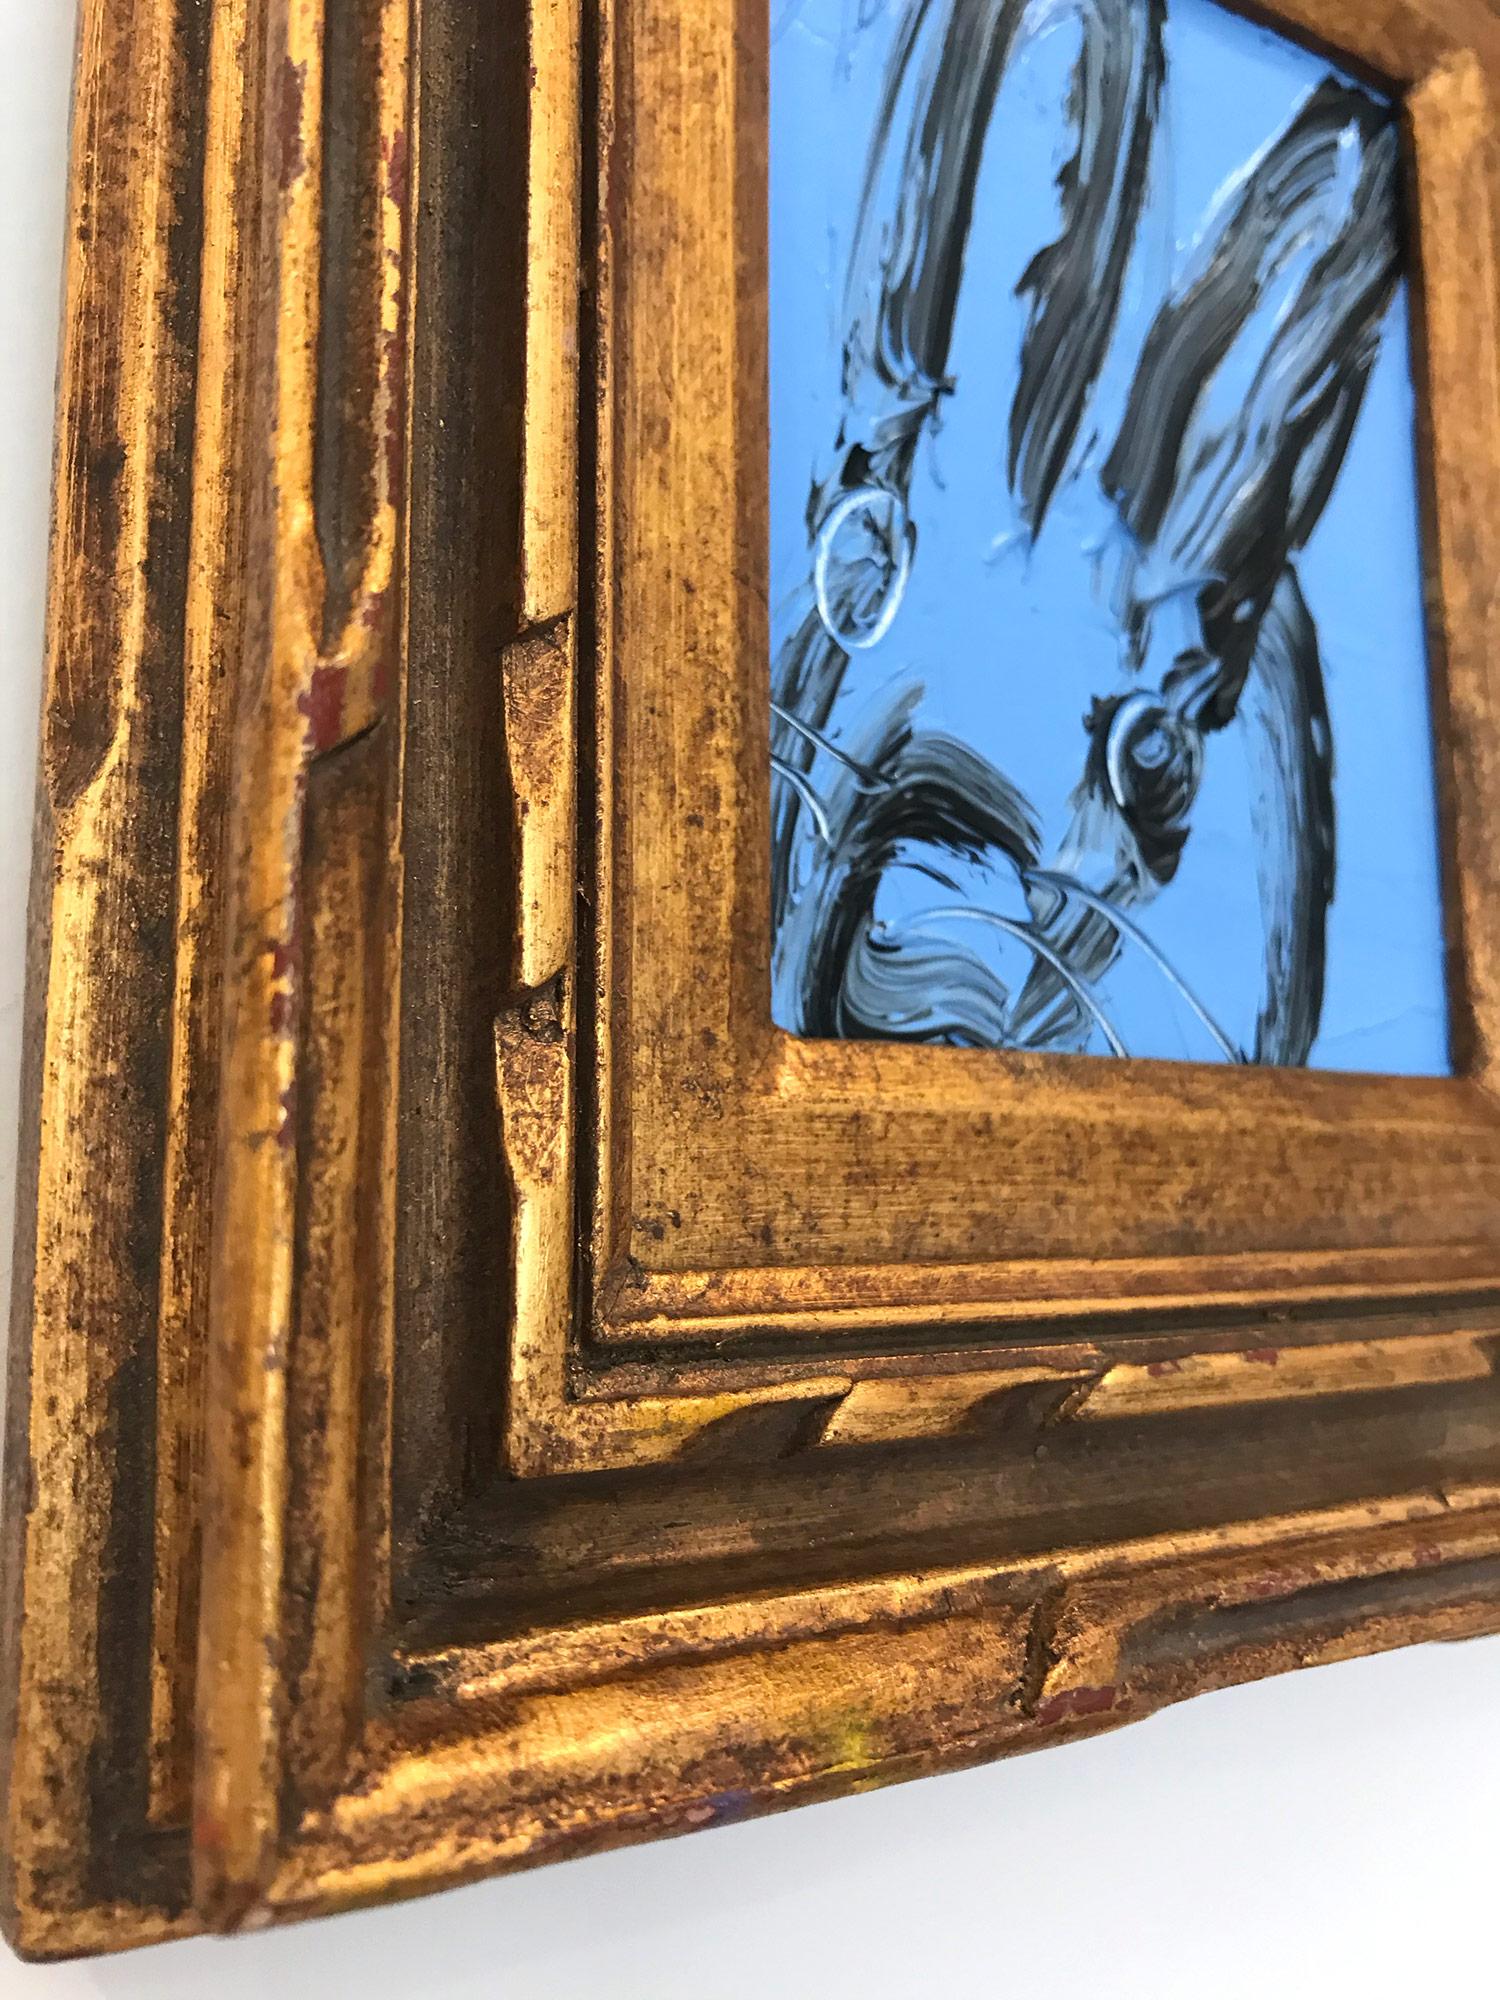 A wonderful composition of one of Slonem's most iconic subjects, Bunnies. This piece depicts a gestural figure of a black bunny on a Peaceful blue background with thick use of paint. It is housed in a wonderful carved wood frame. Inspired by nature